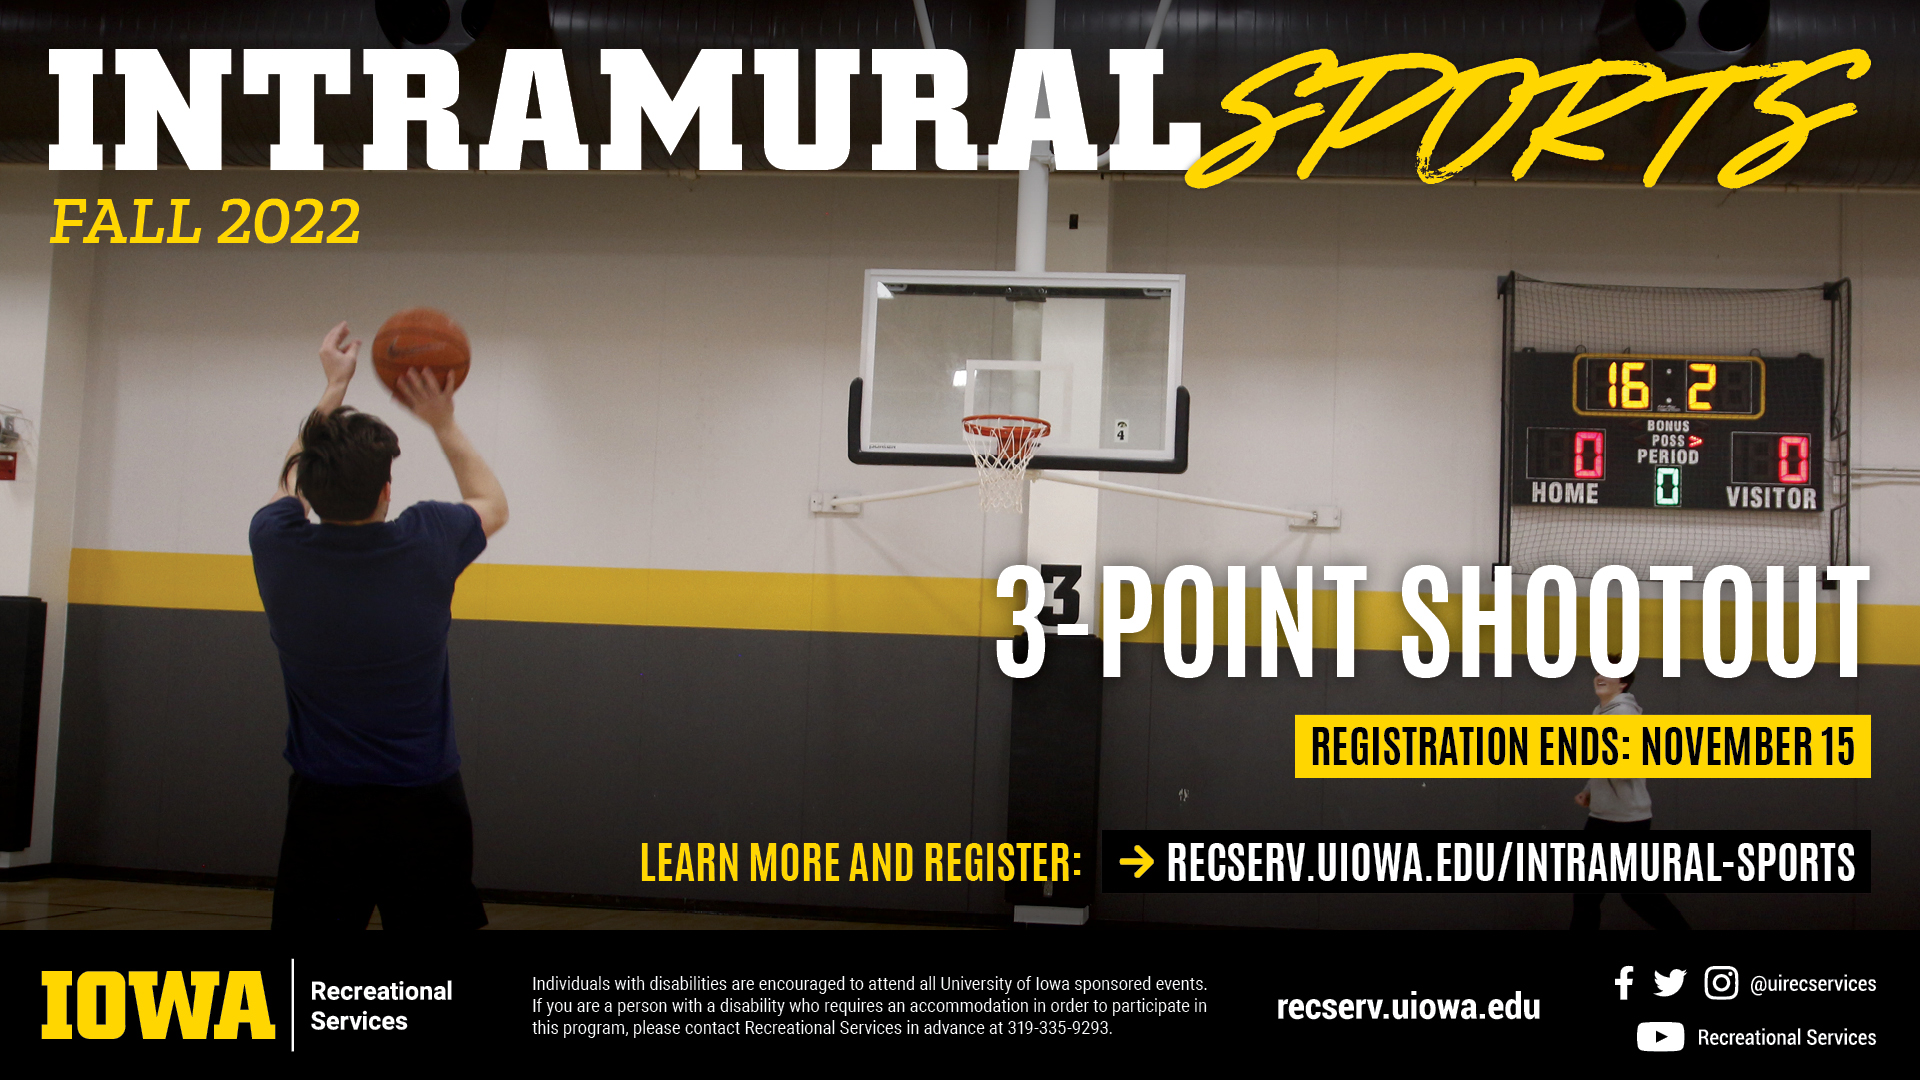 Intramural Sports Fall 2022: 3 Point Shootout. Learn more and register at reserv.uiowa.edu/intramural-sports